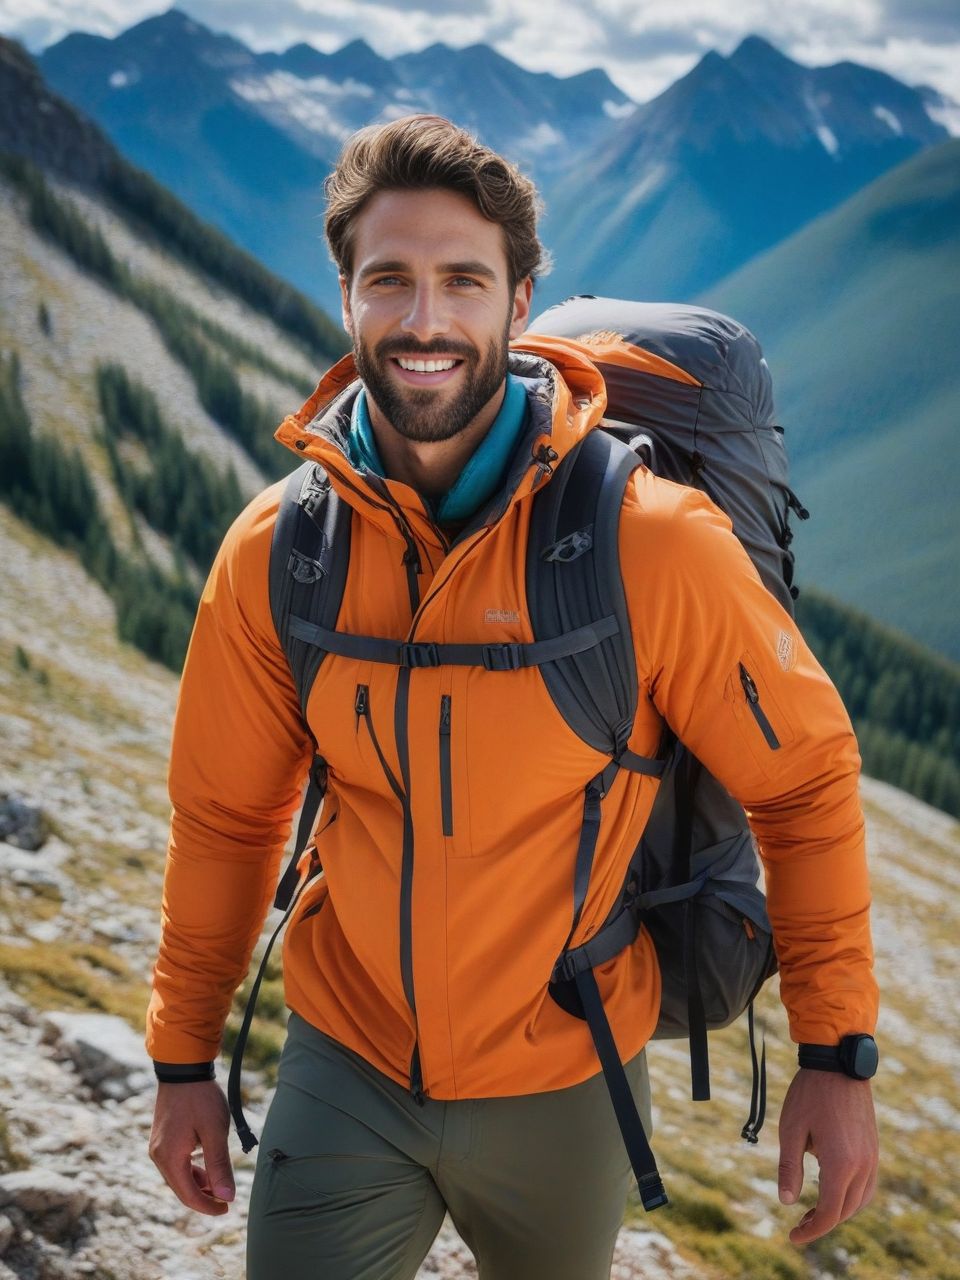 Rugged Young Male Instagram Model in Scenic Mountain Range | Pincel